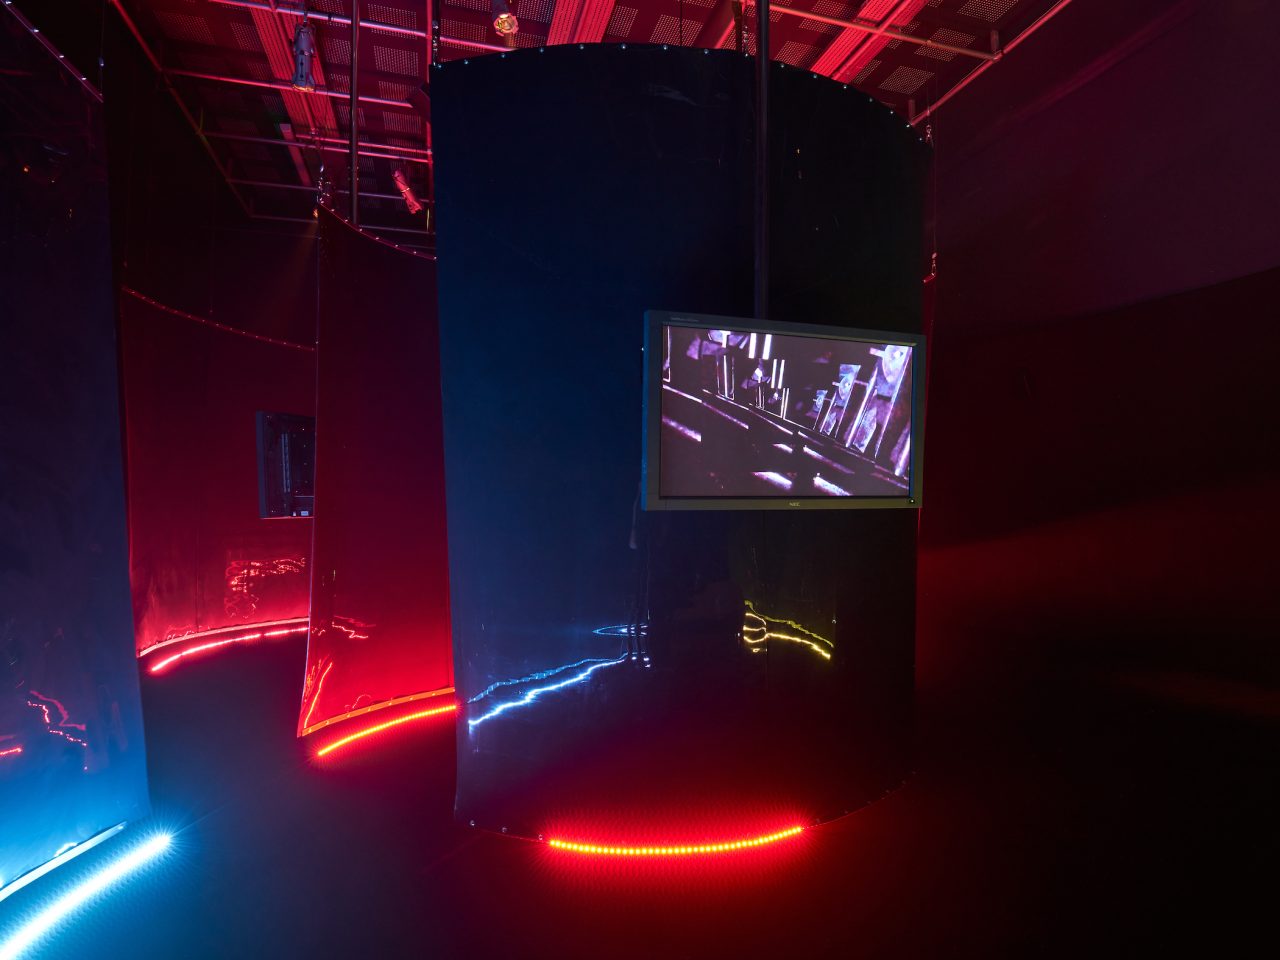 A mixed media installation with multiple red and blue fabric screens with red and blue led lighting underneath. There are TV's in-between the sheets of fabric.